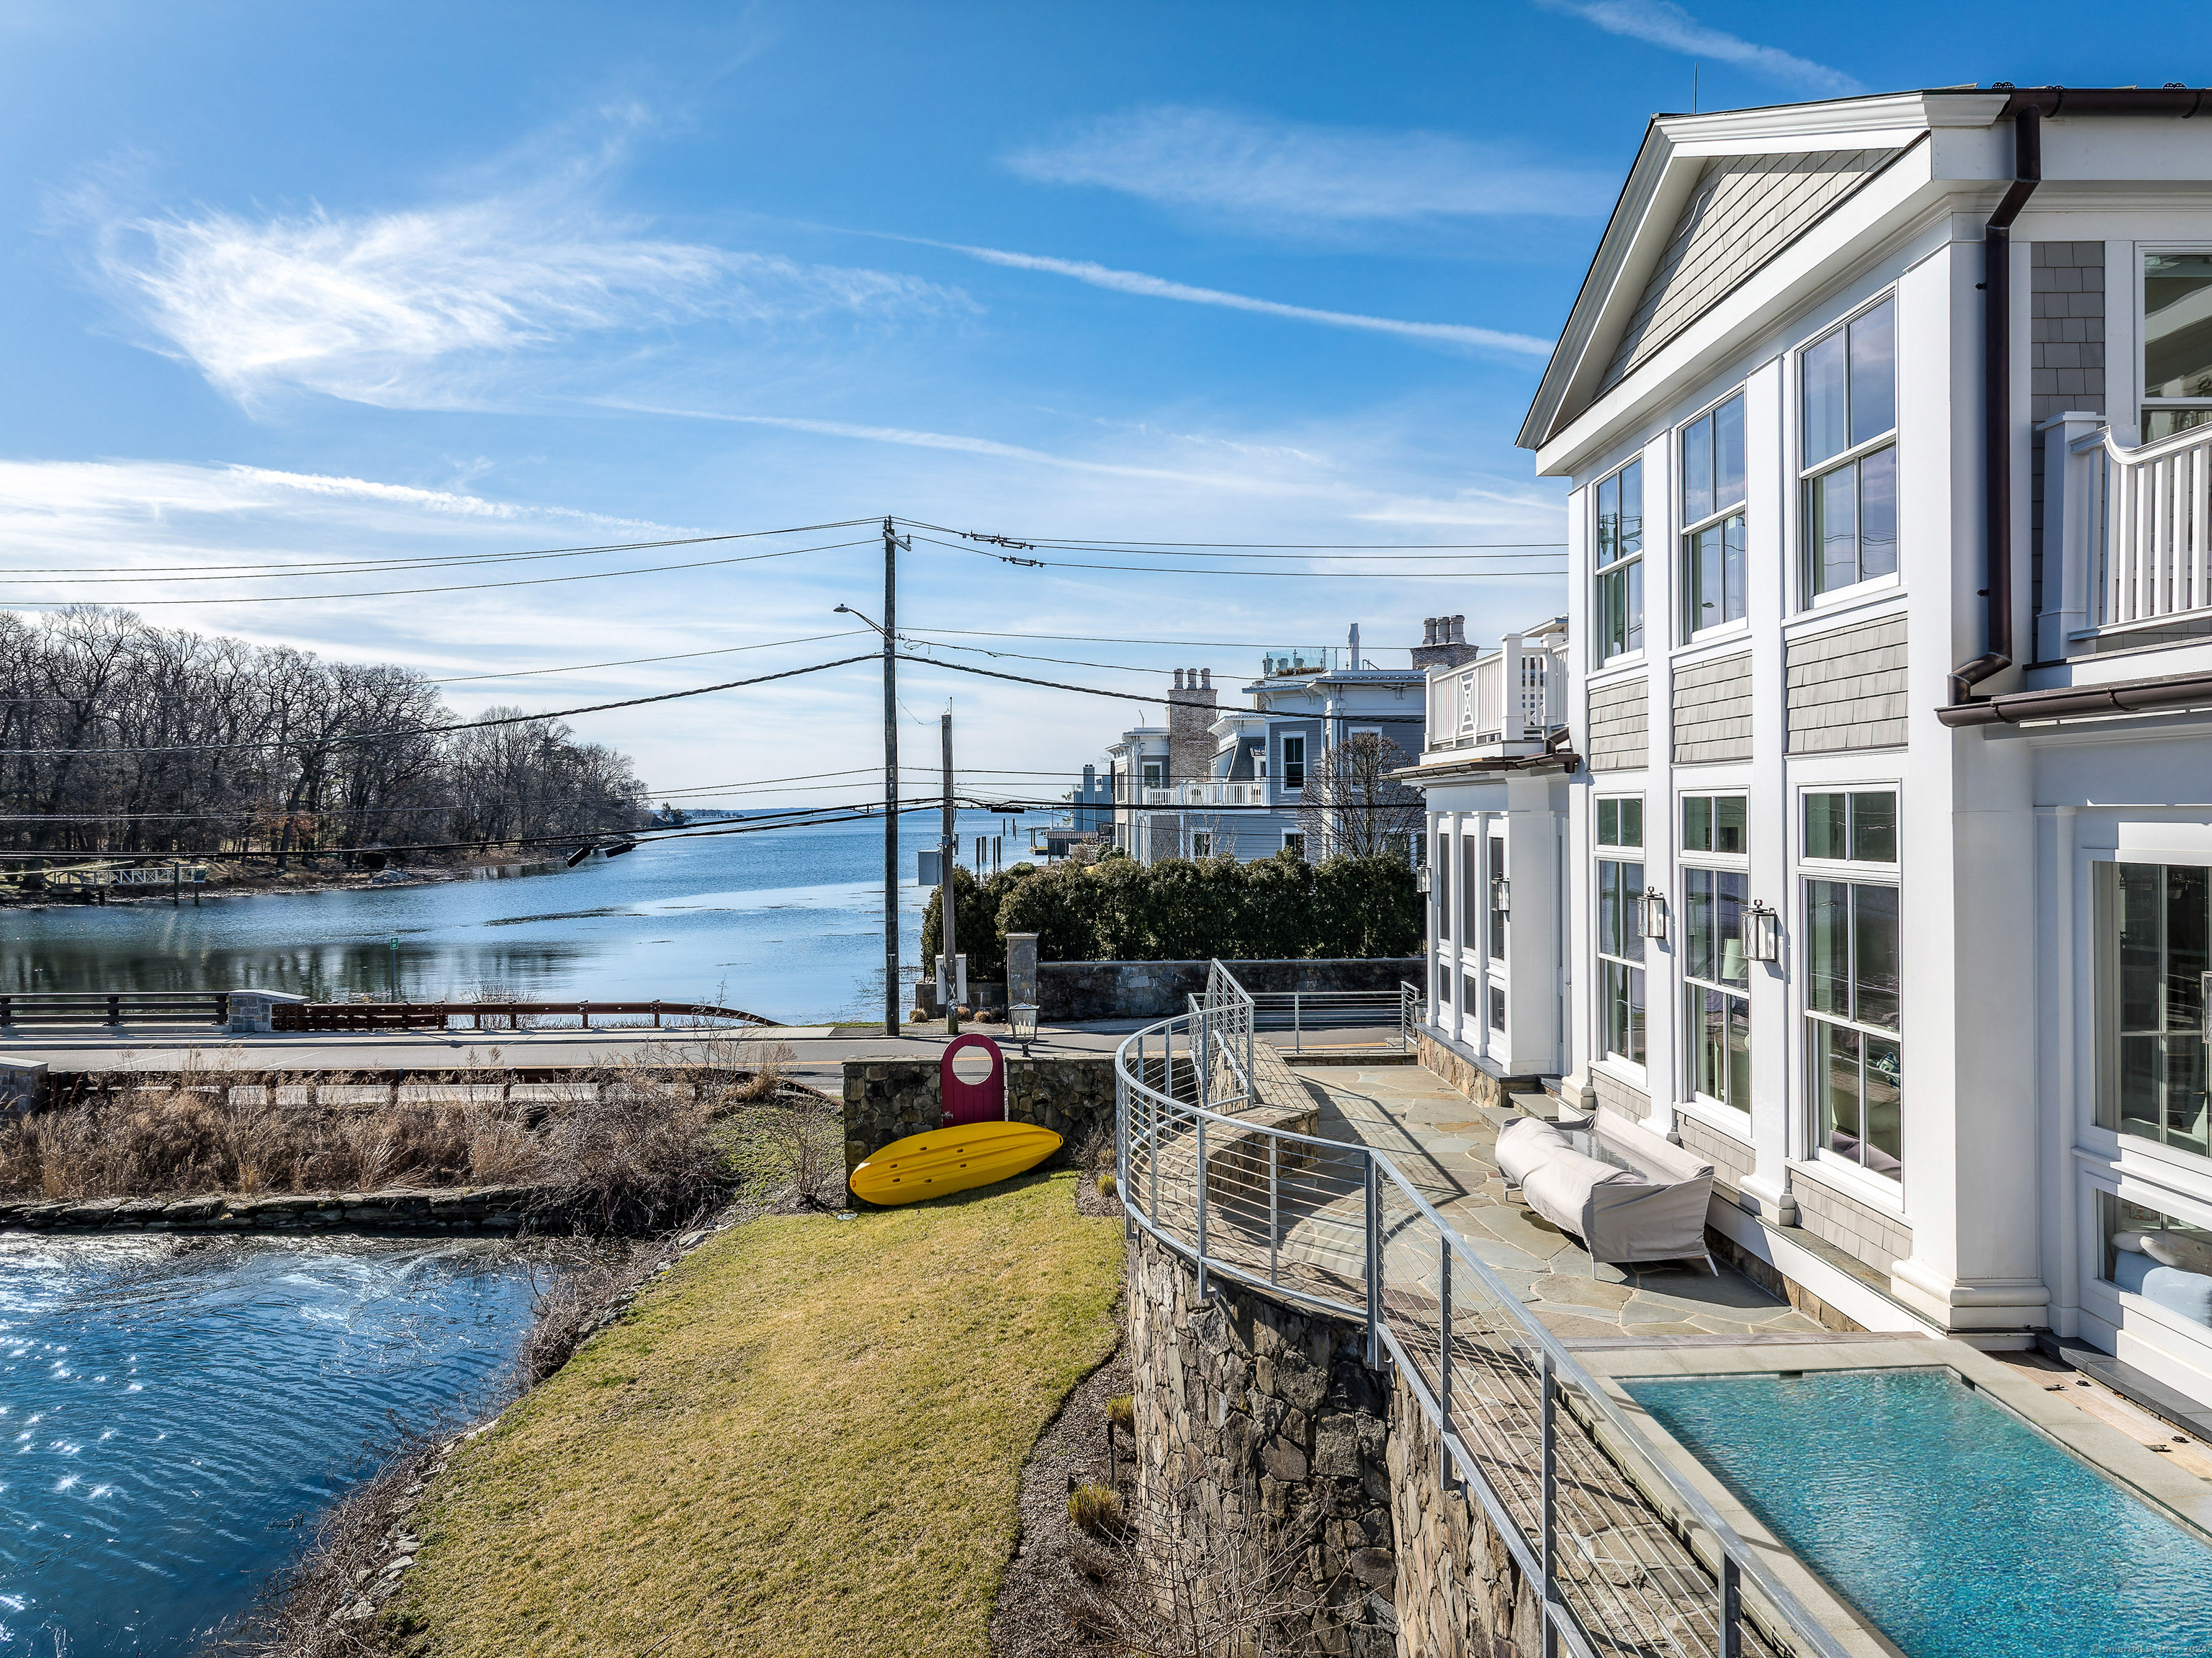 Breathtaking waterfront home, totally transformed into a stunning turnkey showcase. Set high above the water with amazing water views of the Long Island Sound and Smith Cove, it is walking distance to Greenwich Ave restaurants, train, park and ferry boats. Designed by VanderHorn Architects, great attention is given to providing sunlit rooms and well thought-out additions. Details include an elevator, 10' ceilings and custom cabinetry. The main floor boasts an open floor plan with gourmet kitchen, dining and family rooms overlooking the water. There is a library and 2 offices. Upstairs, the primary suite has walk-in closets, stunning bath and deck. There are 2 additional ensuite bedrooms with decks. The rooftop terrace has panoramic views of the Sound. Bonuses: pool, separate apartment, gym & 3 car garage.